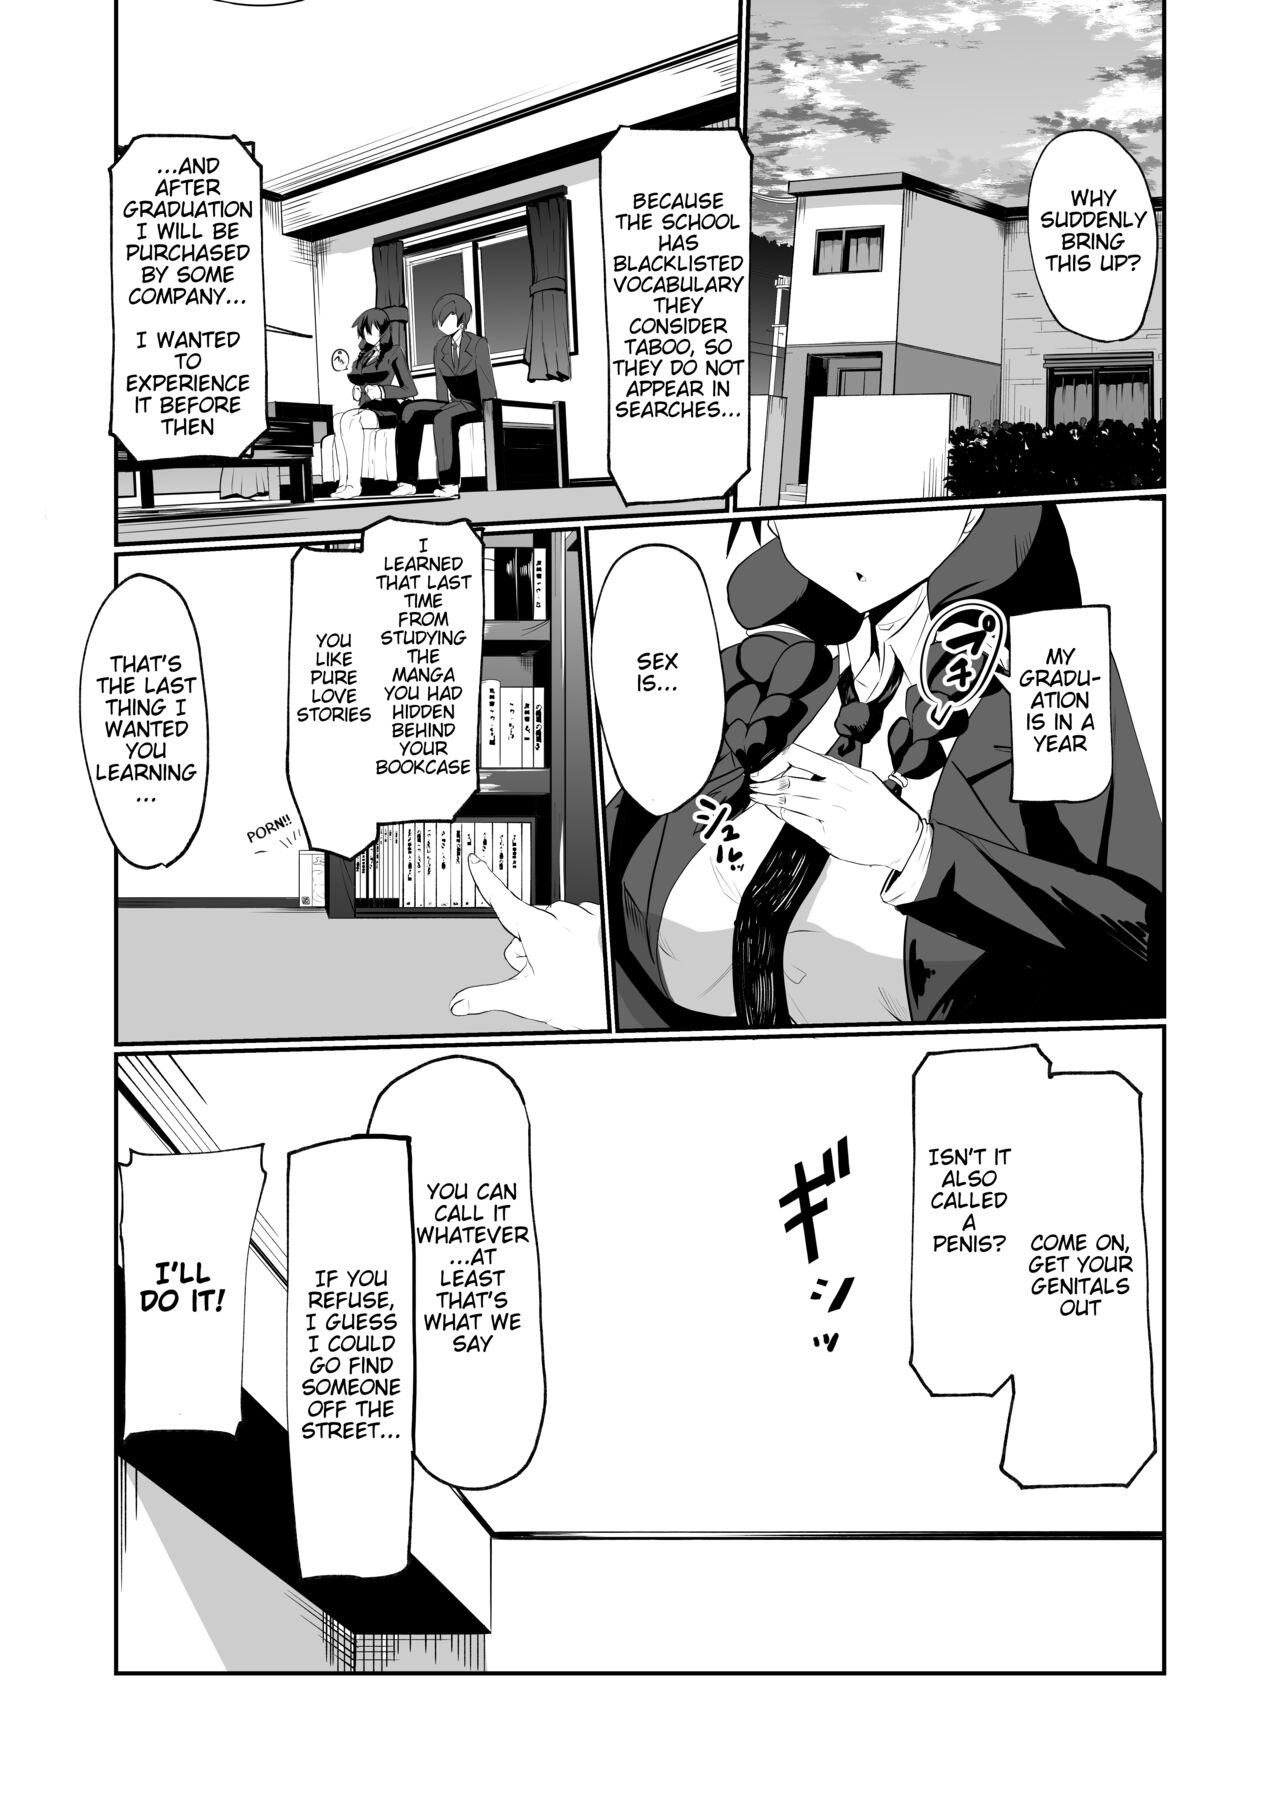 Phat The Manga about being Lovey-Dovey with your Android Childhood Friend - Original Grandma - Page 7